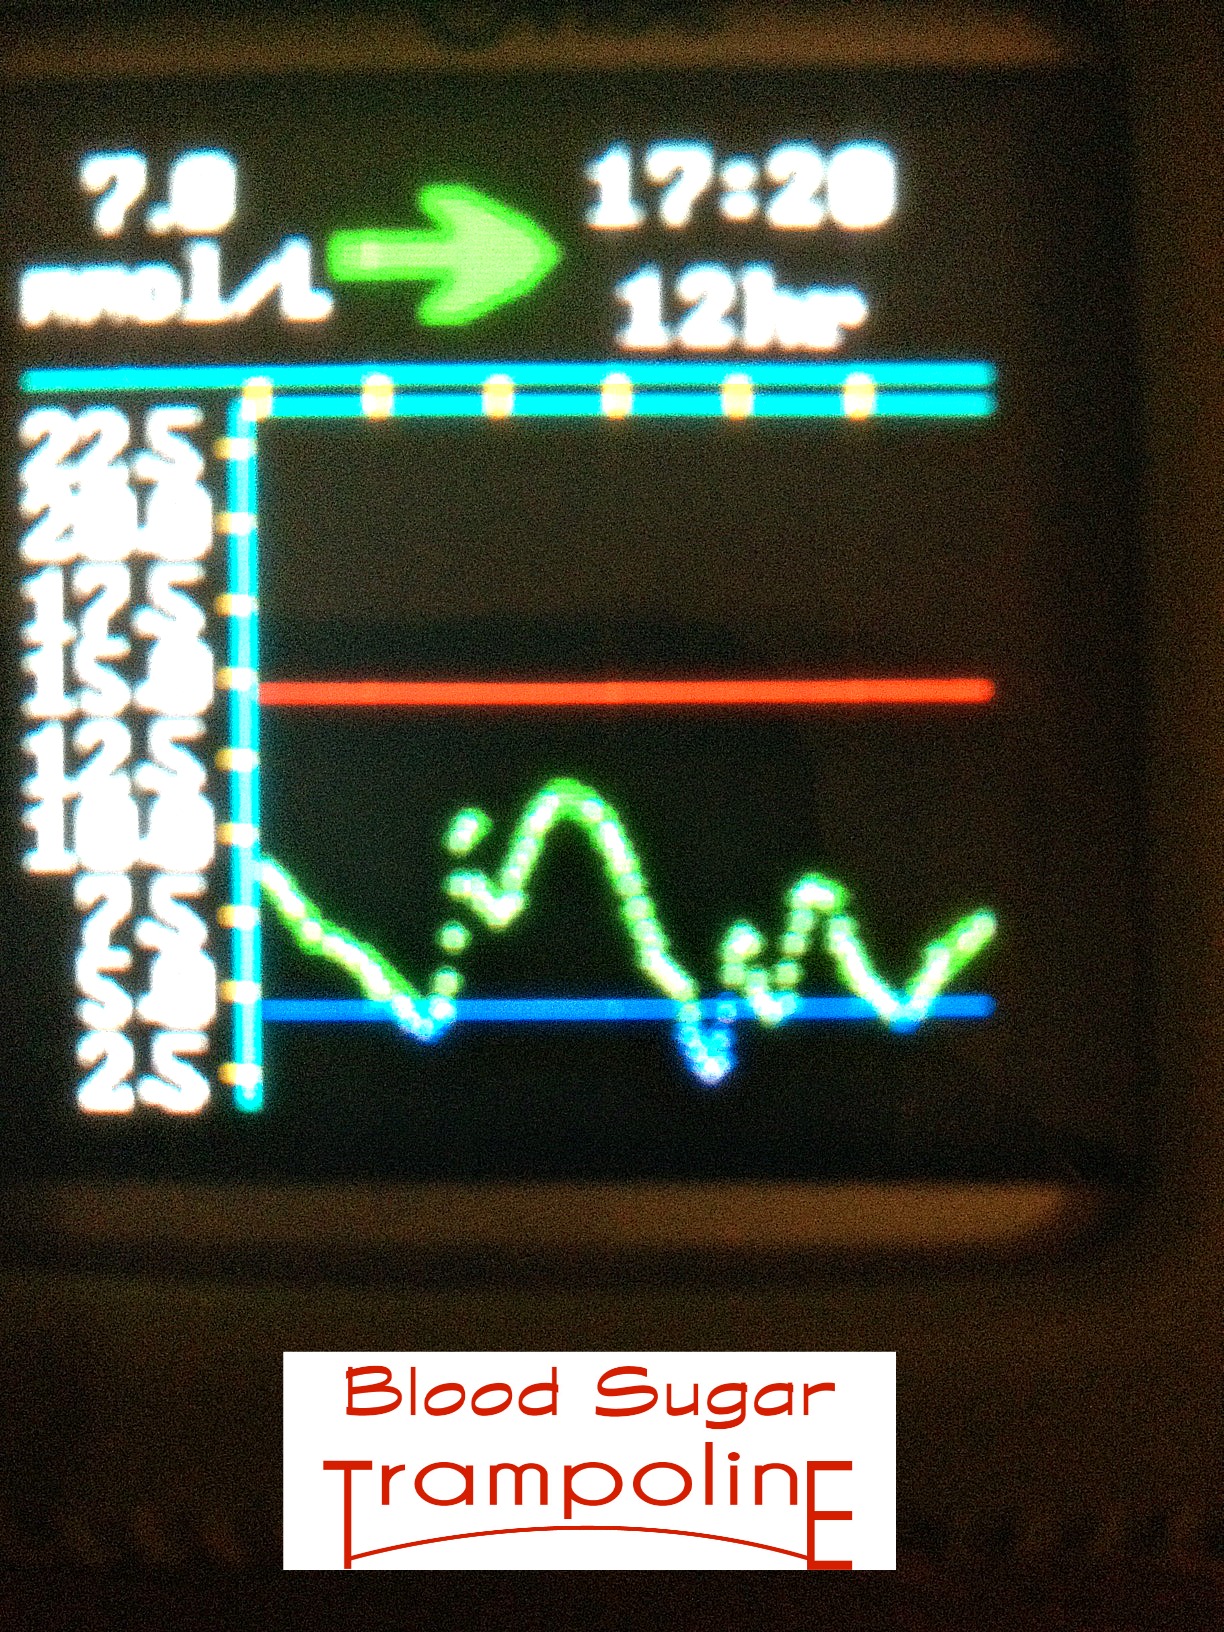 Bouncing on the Blood Sugar Trampoline